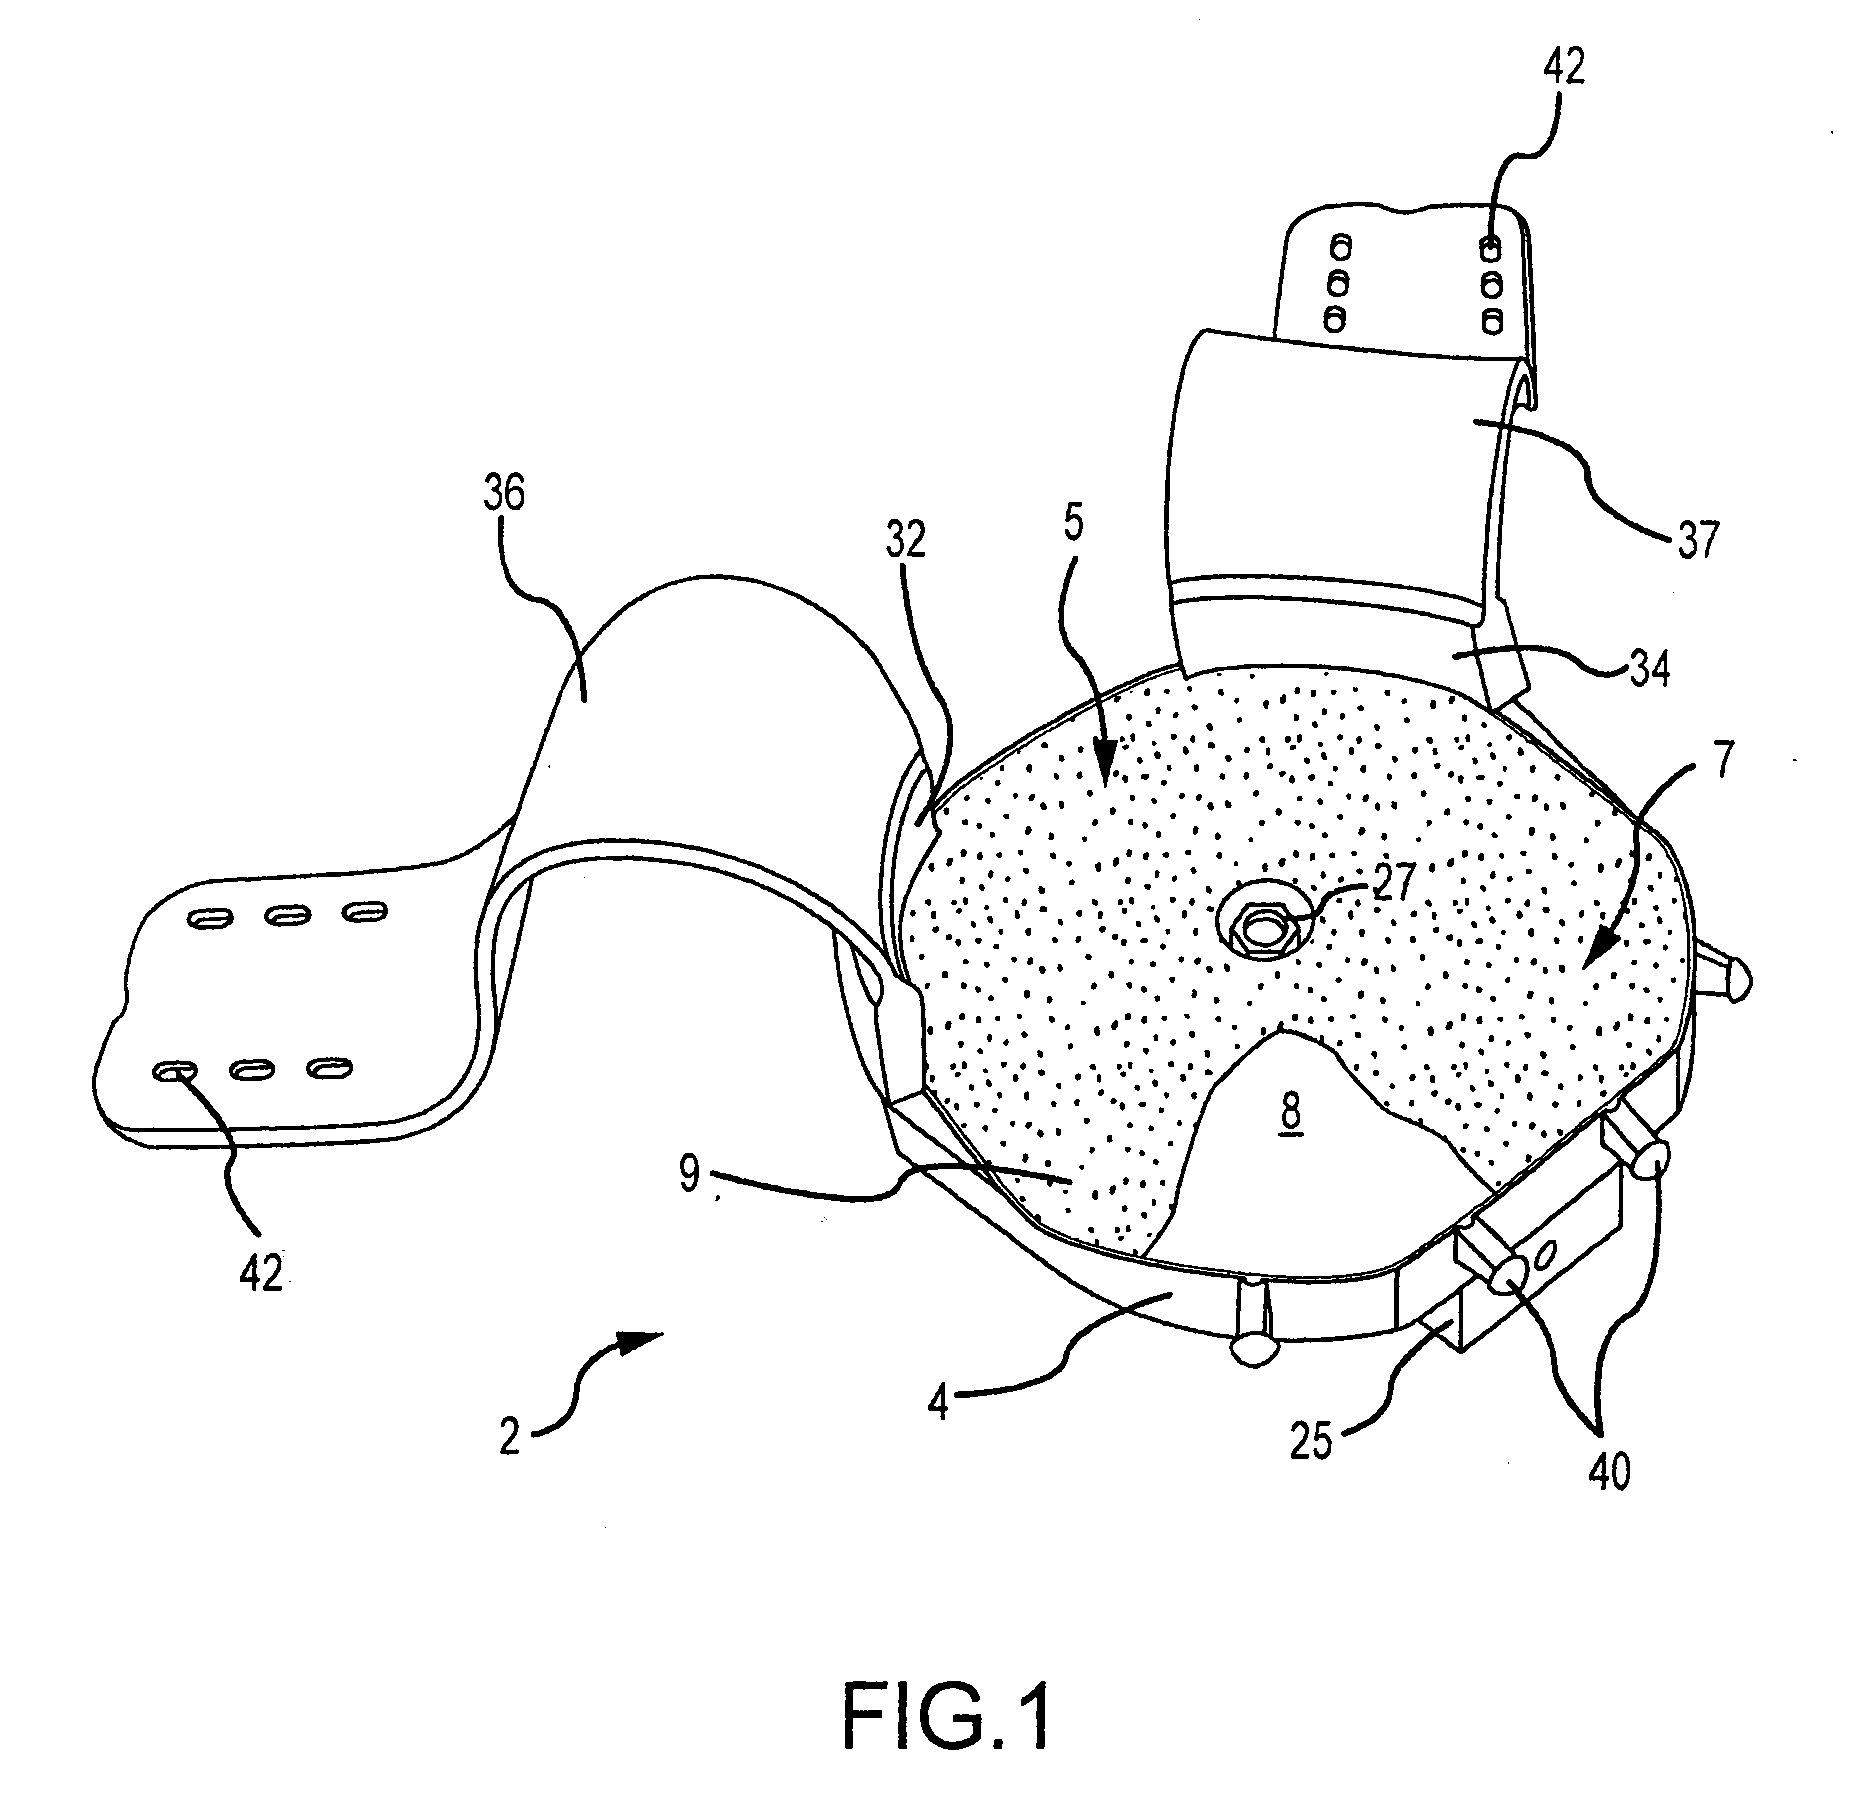 Apparatus And Method For Diagnostic Leverage Testing Of Equine Distal Limb